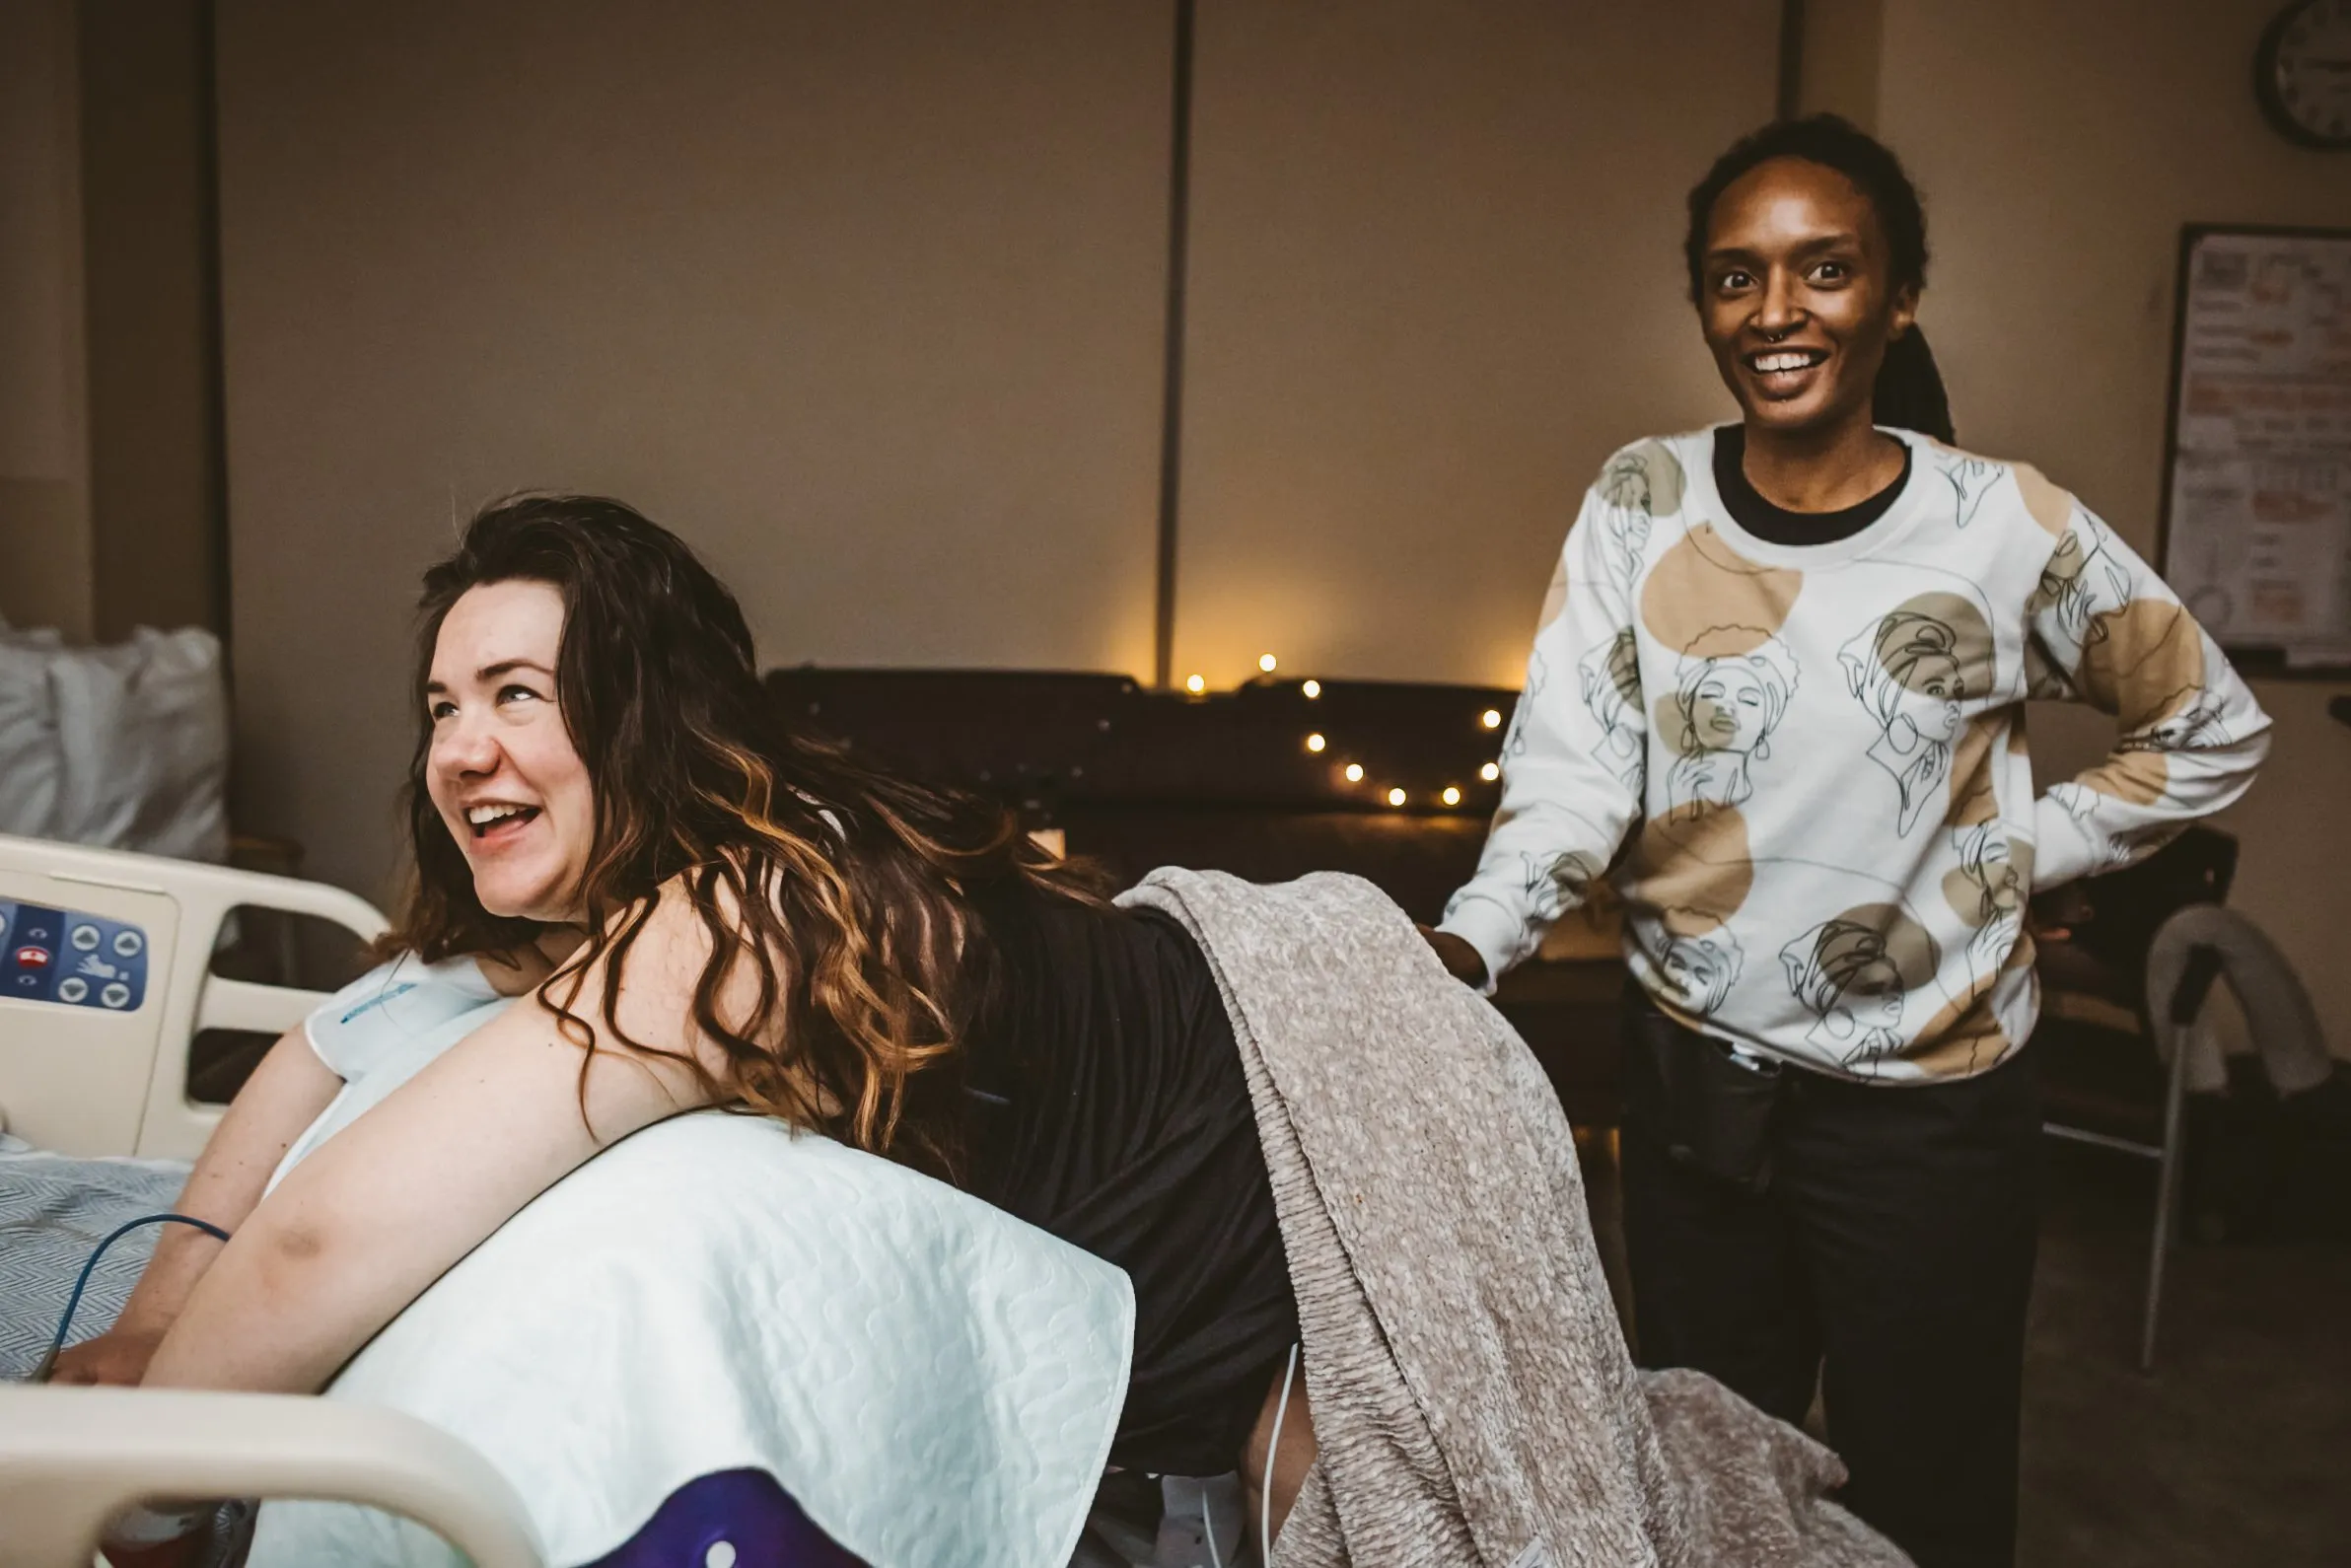 Client smiling while doula offers sacral support during labor